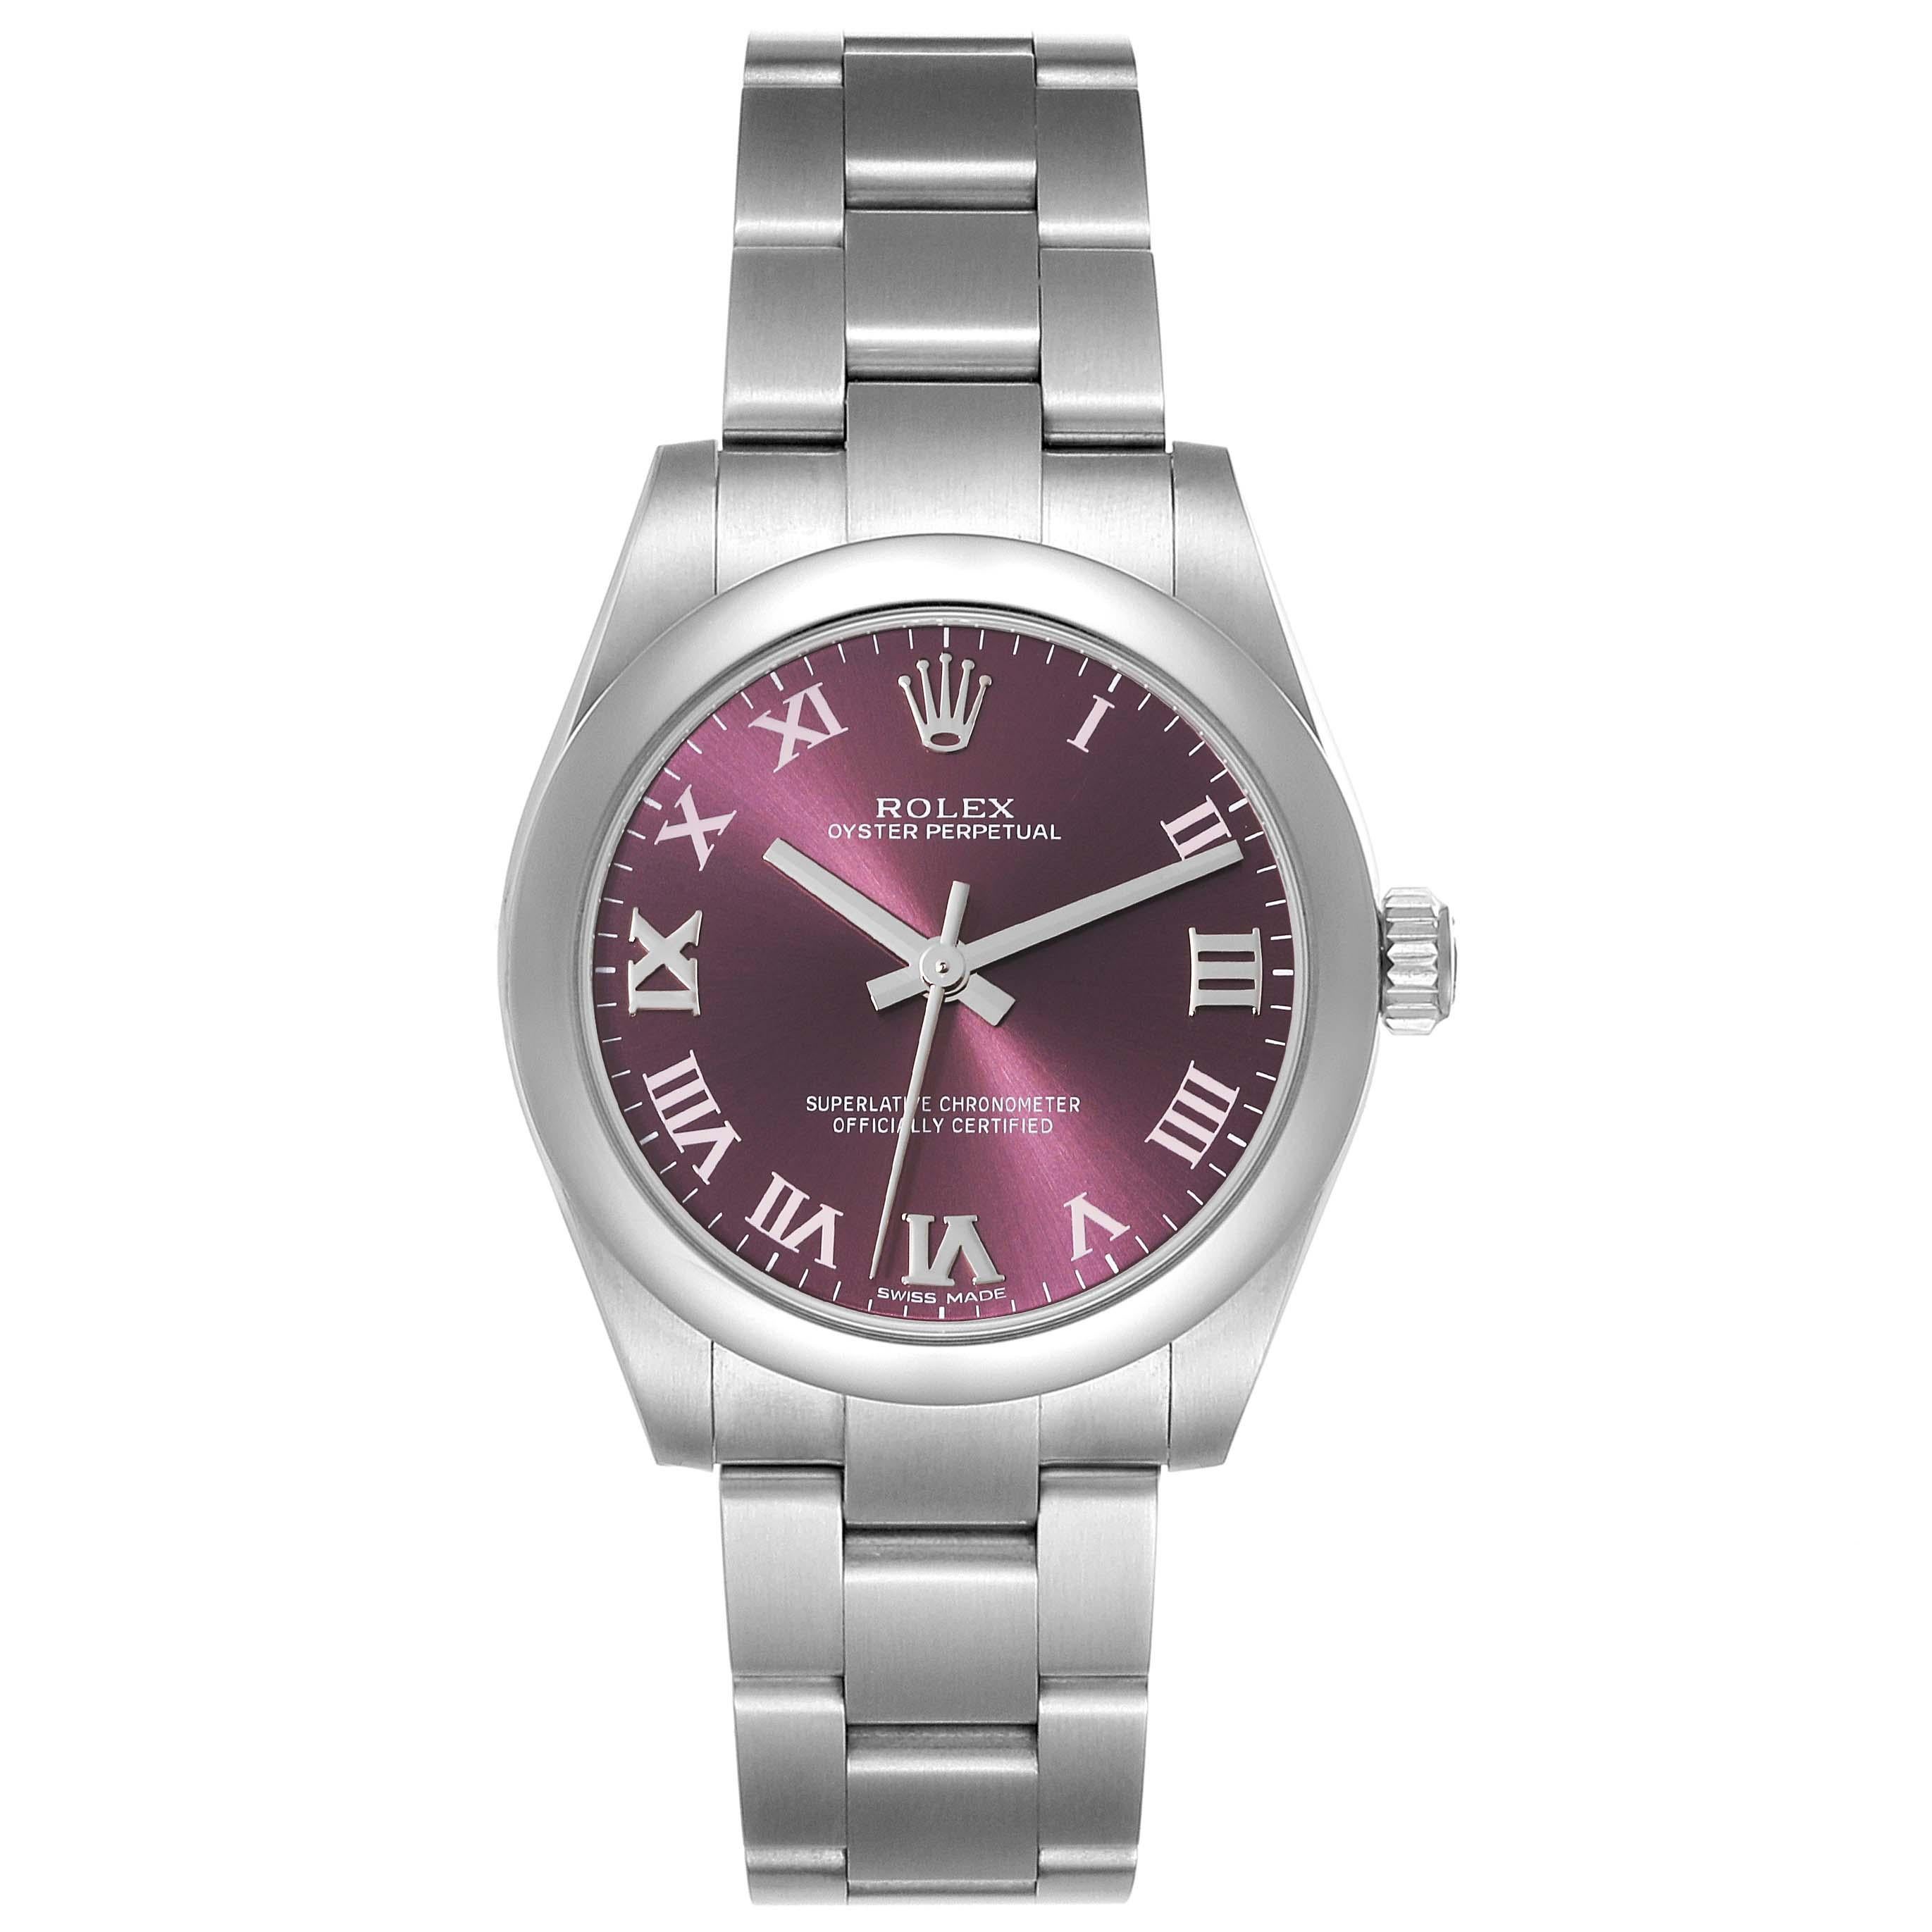 Rolex Oyster Perpetual Midsize Red Grape Dial Steel Ladies Watch 177200. Officially certified chronometer automatic self-winding movement. Stainless steel oyster case 31.0 mm in diameter. Rolex logo on the crown. Stainless steel smooth domed bezel.